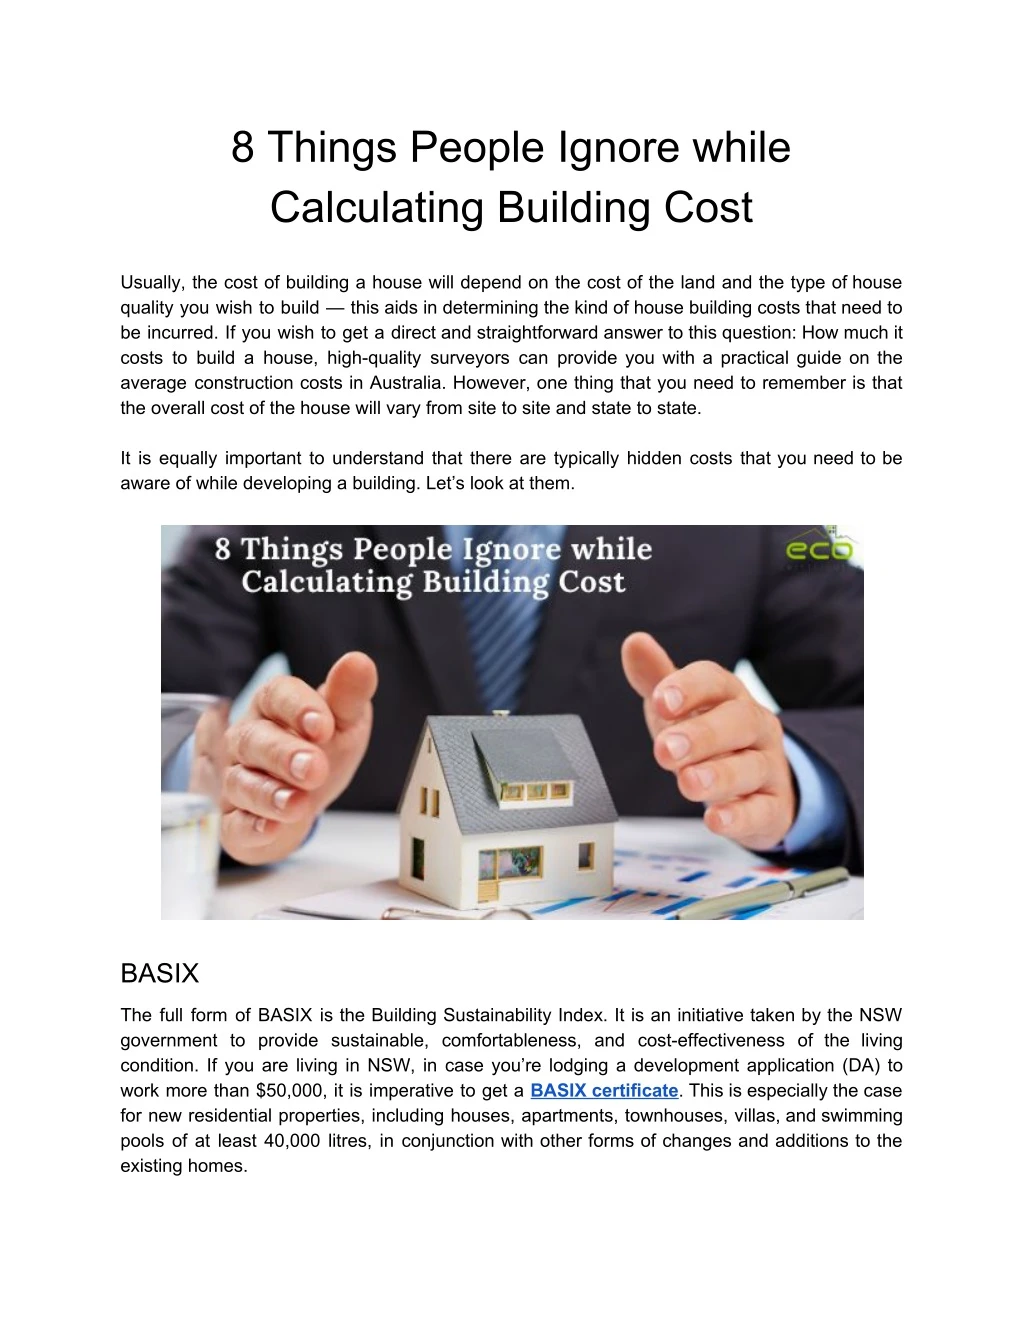 8 things people ignore while calculating building